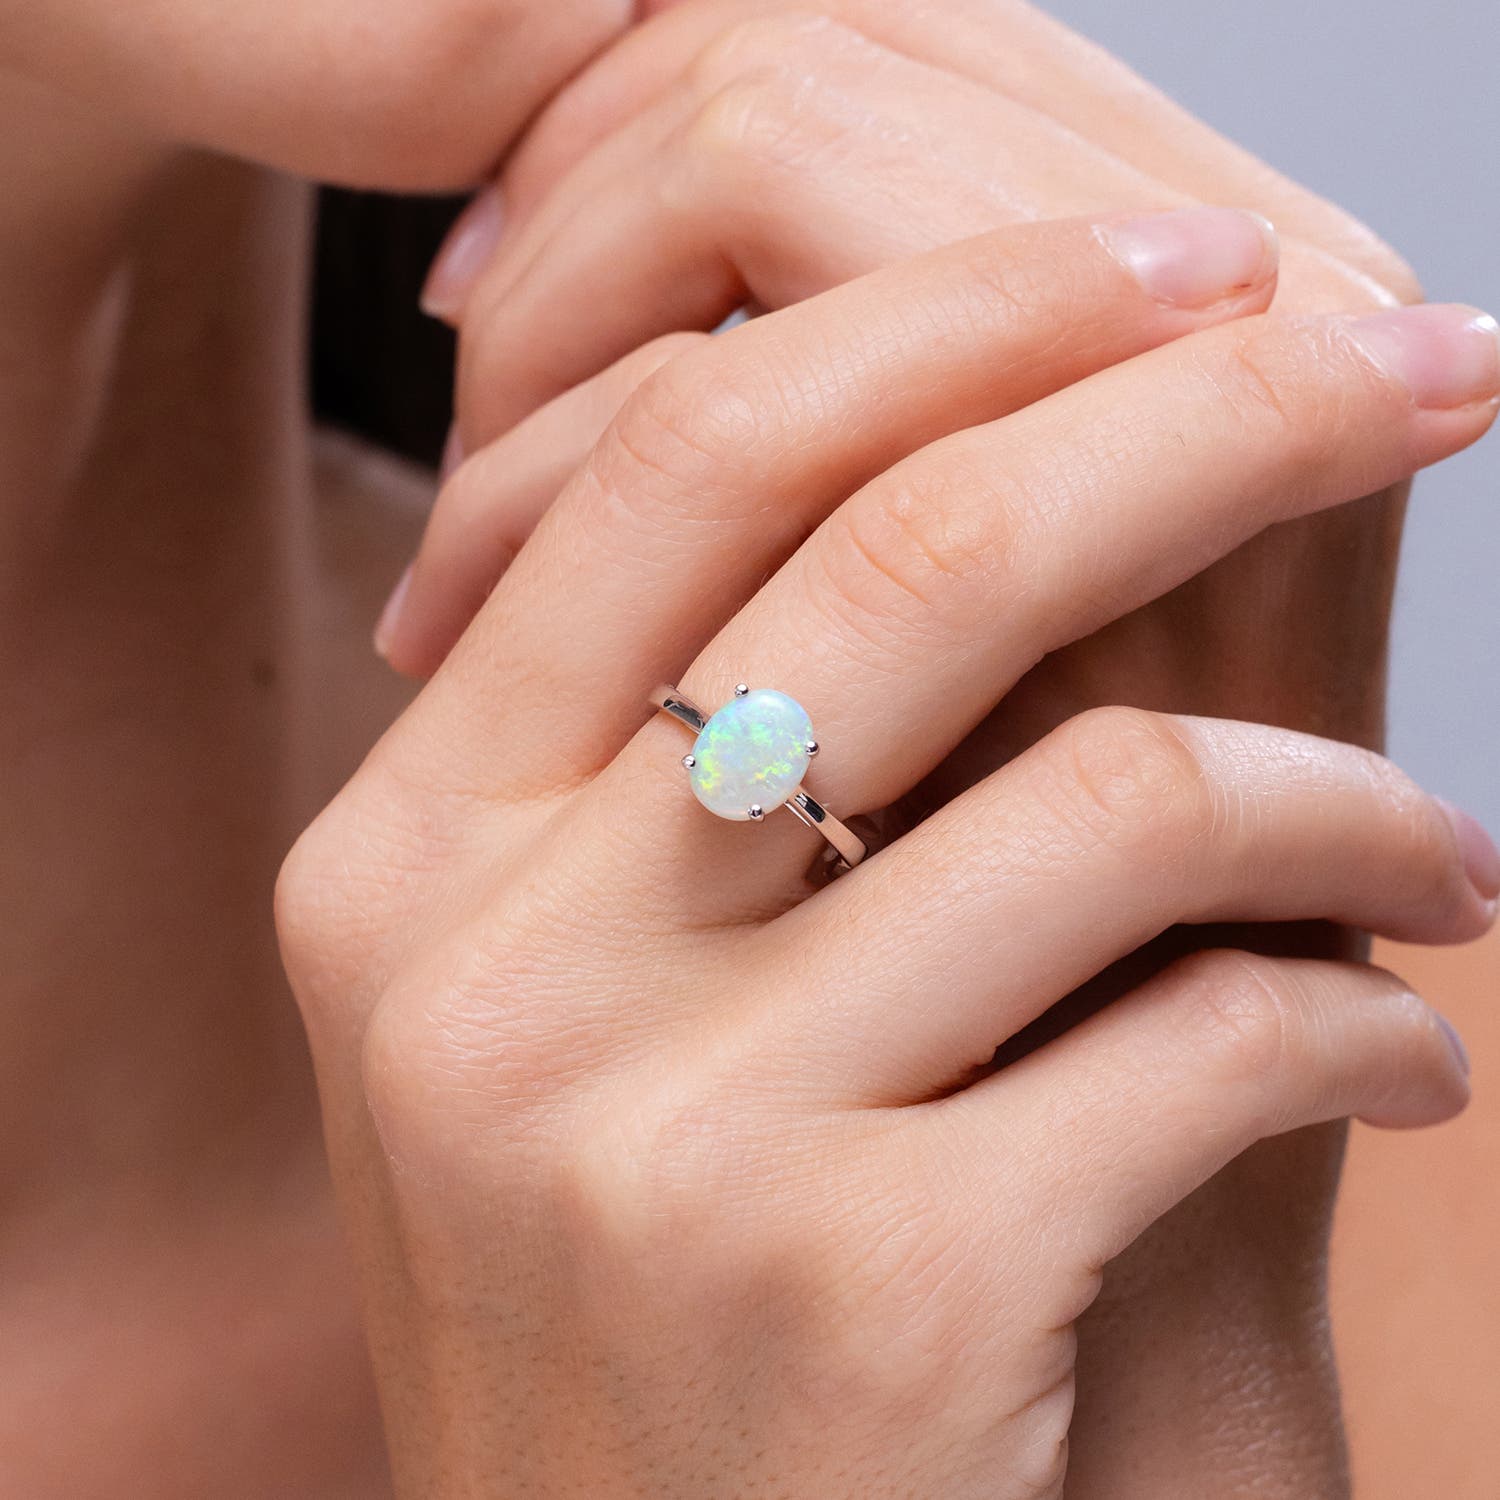 A - Opal / 0.8 CT / 14 KT Yellow Gold